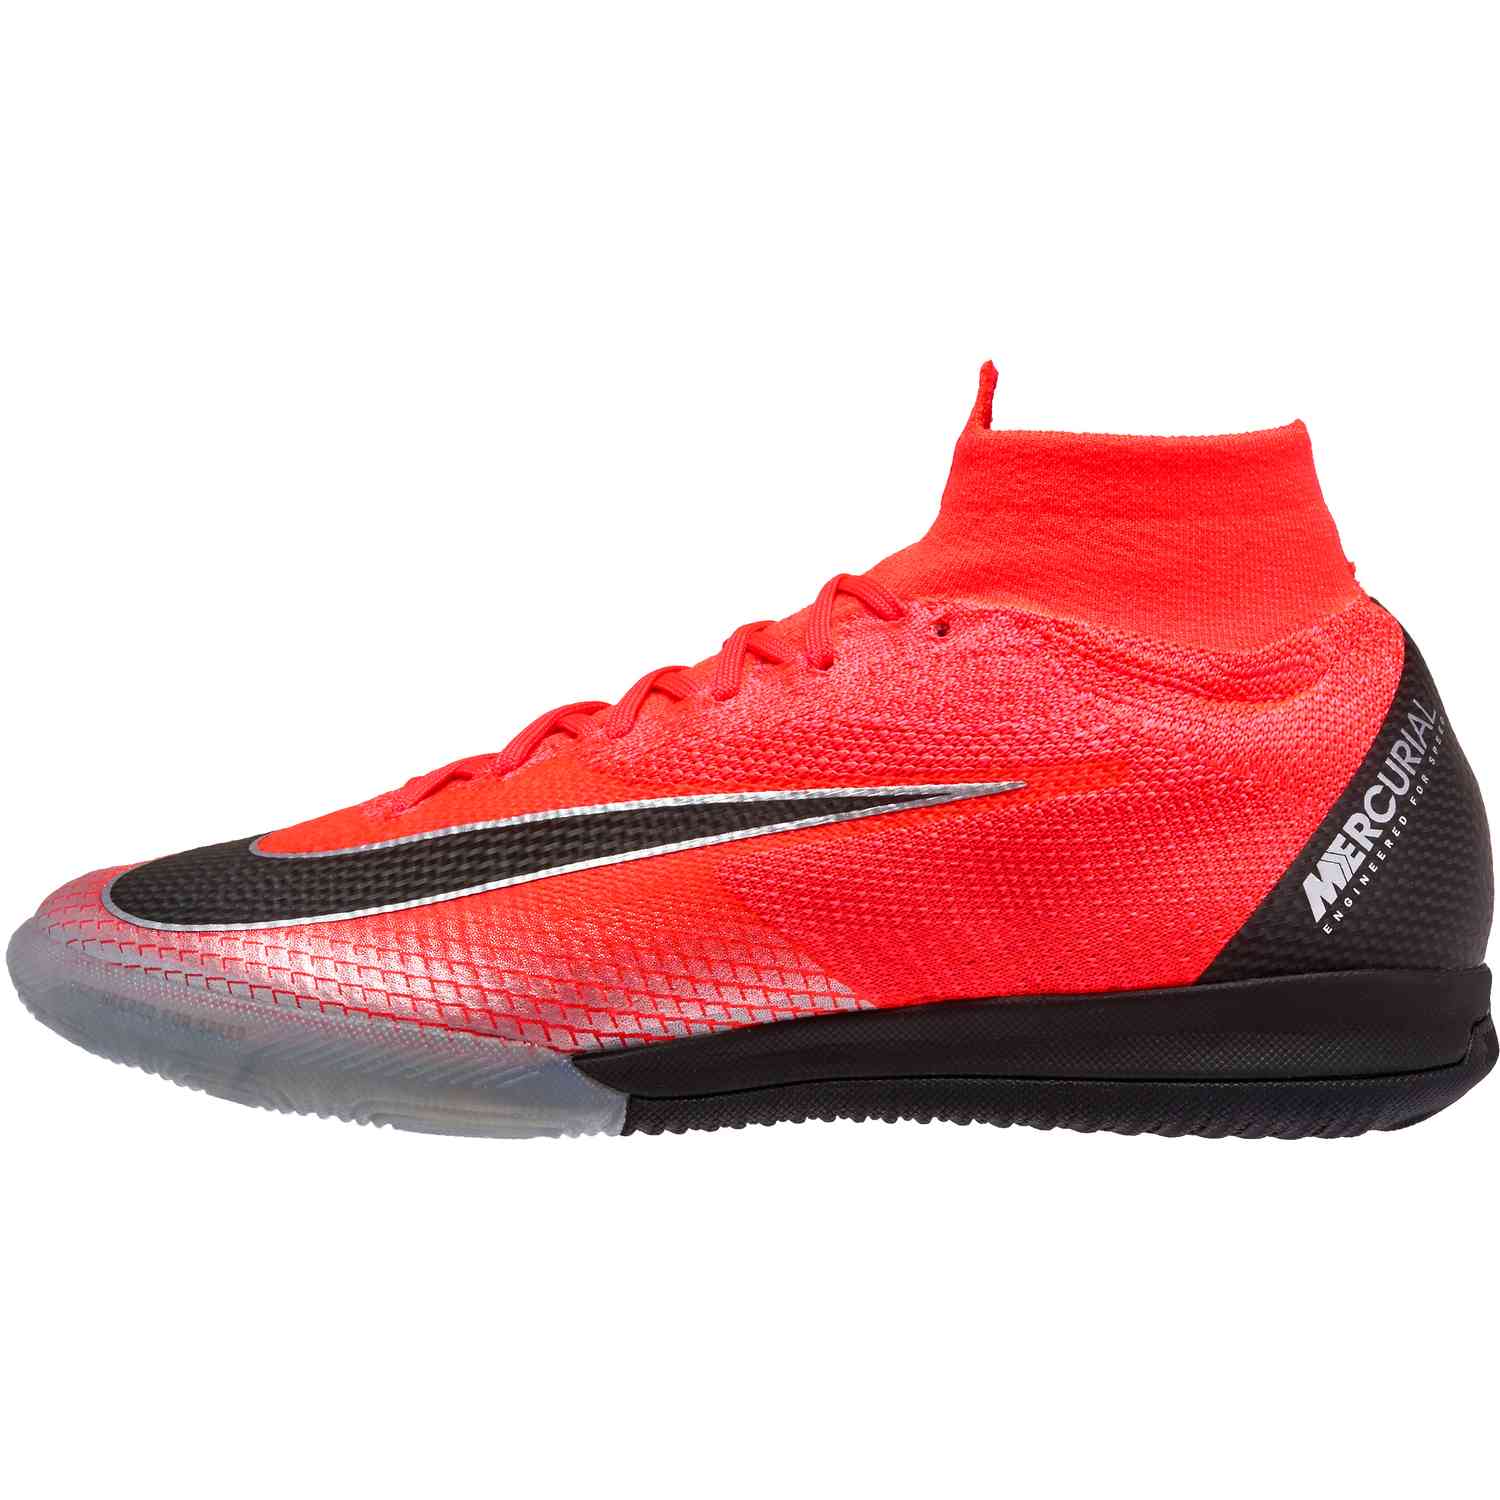 Nike CR7 SuperflyX Elite IC - Chapter 7 